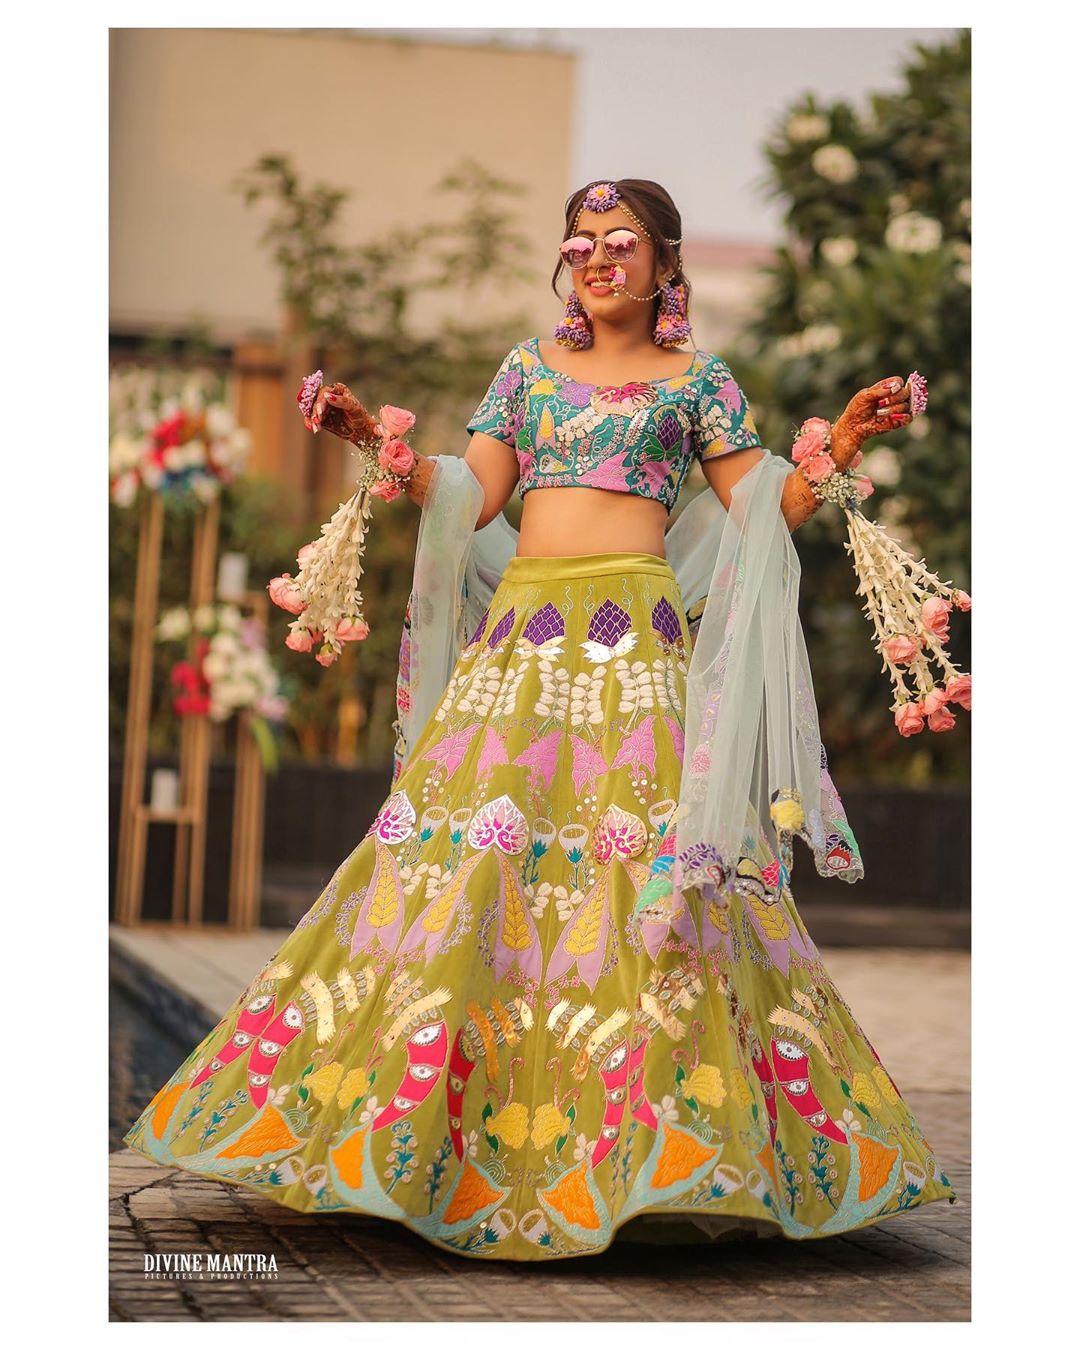 Quirky & Stylish Bridal Outfits For Pool Party! | Weddingplz